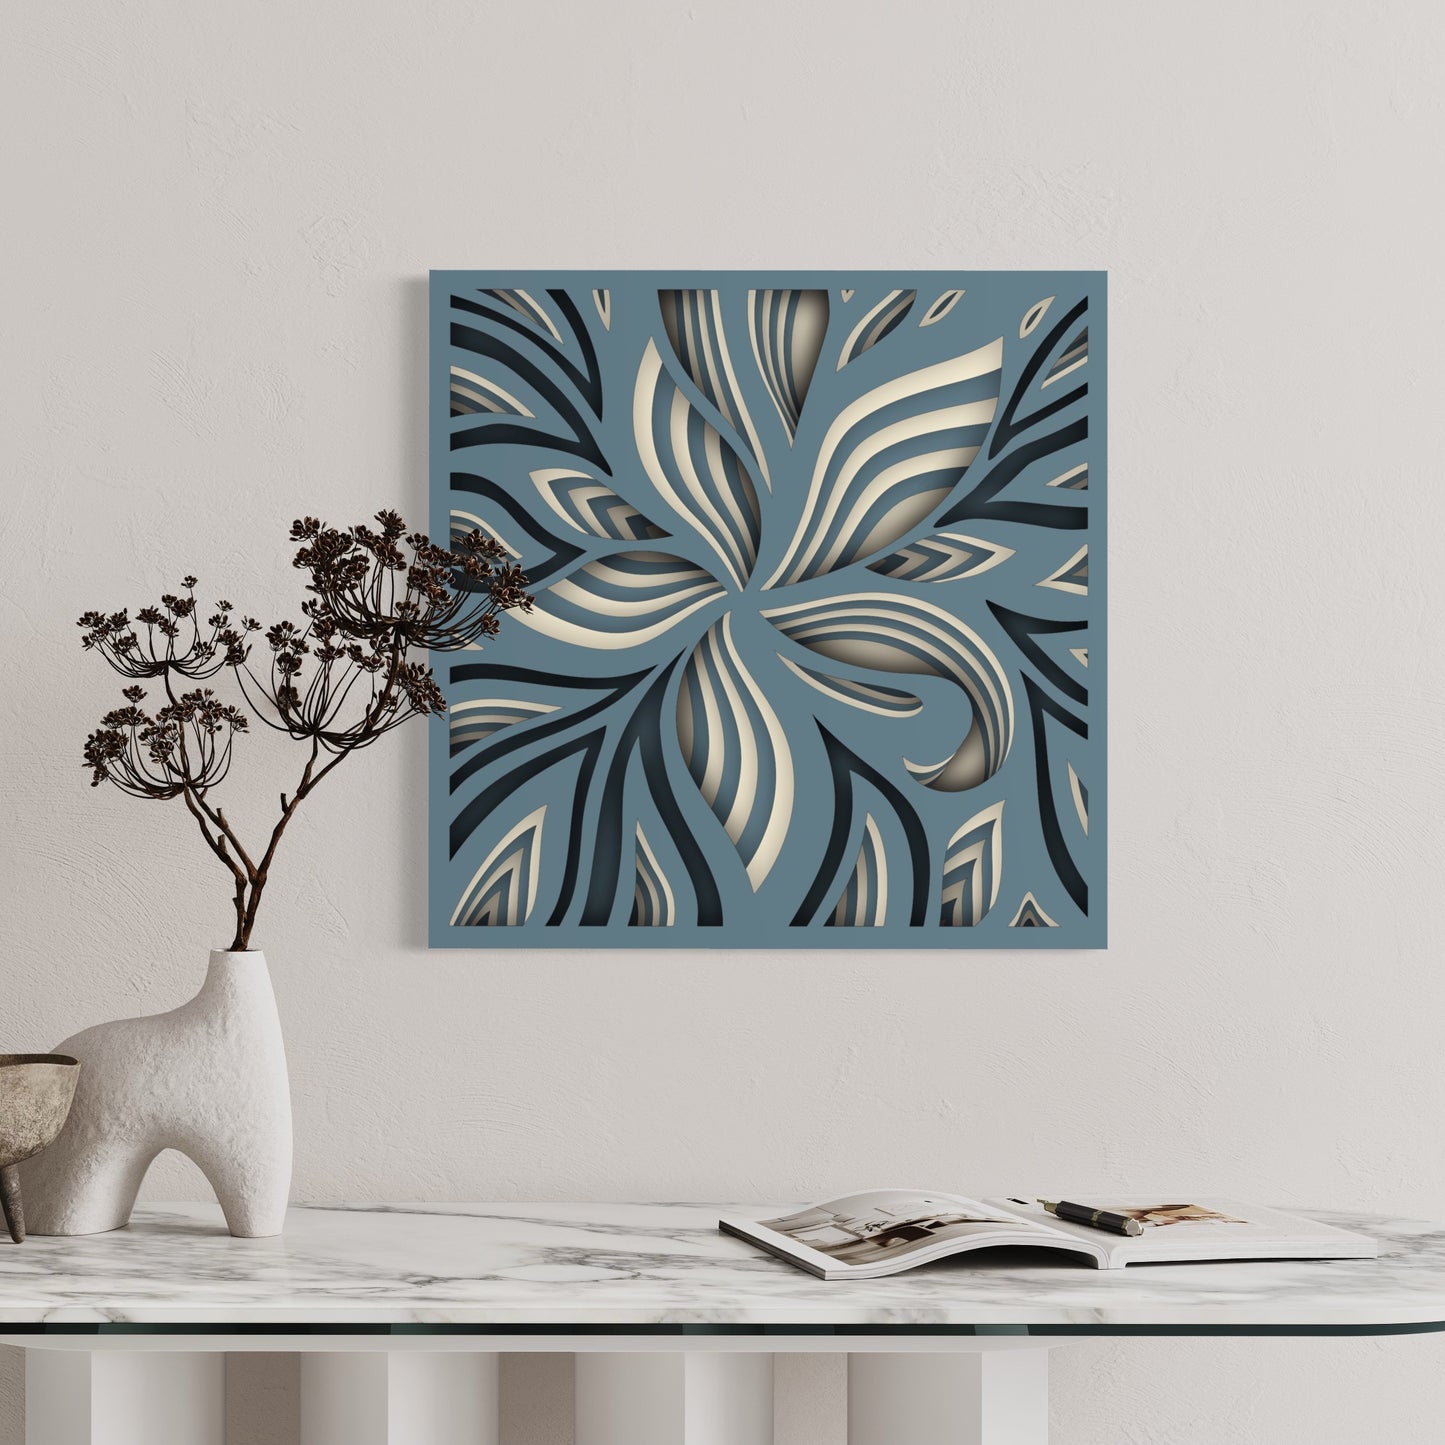 Lily Wooden Wall Art | 15 x 15 Inch | Color Oslo Grey And Pearl Bush 